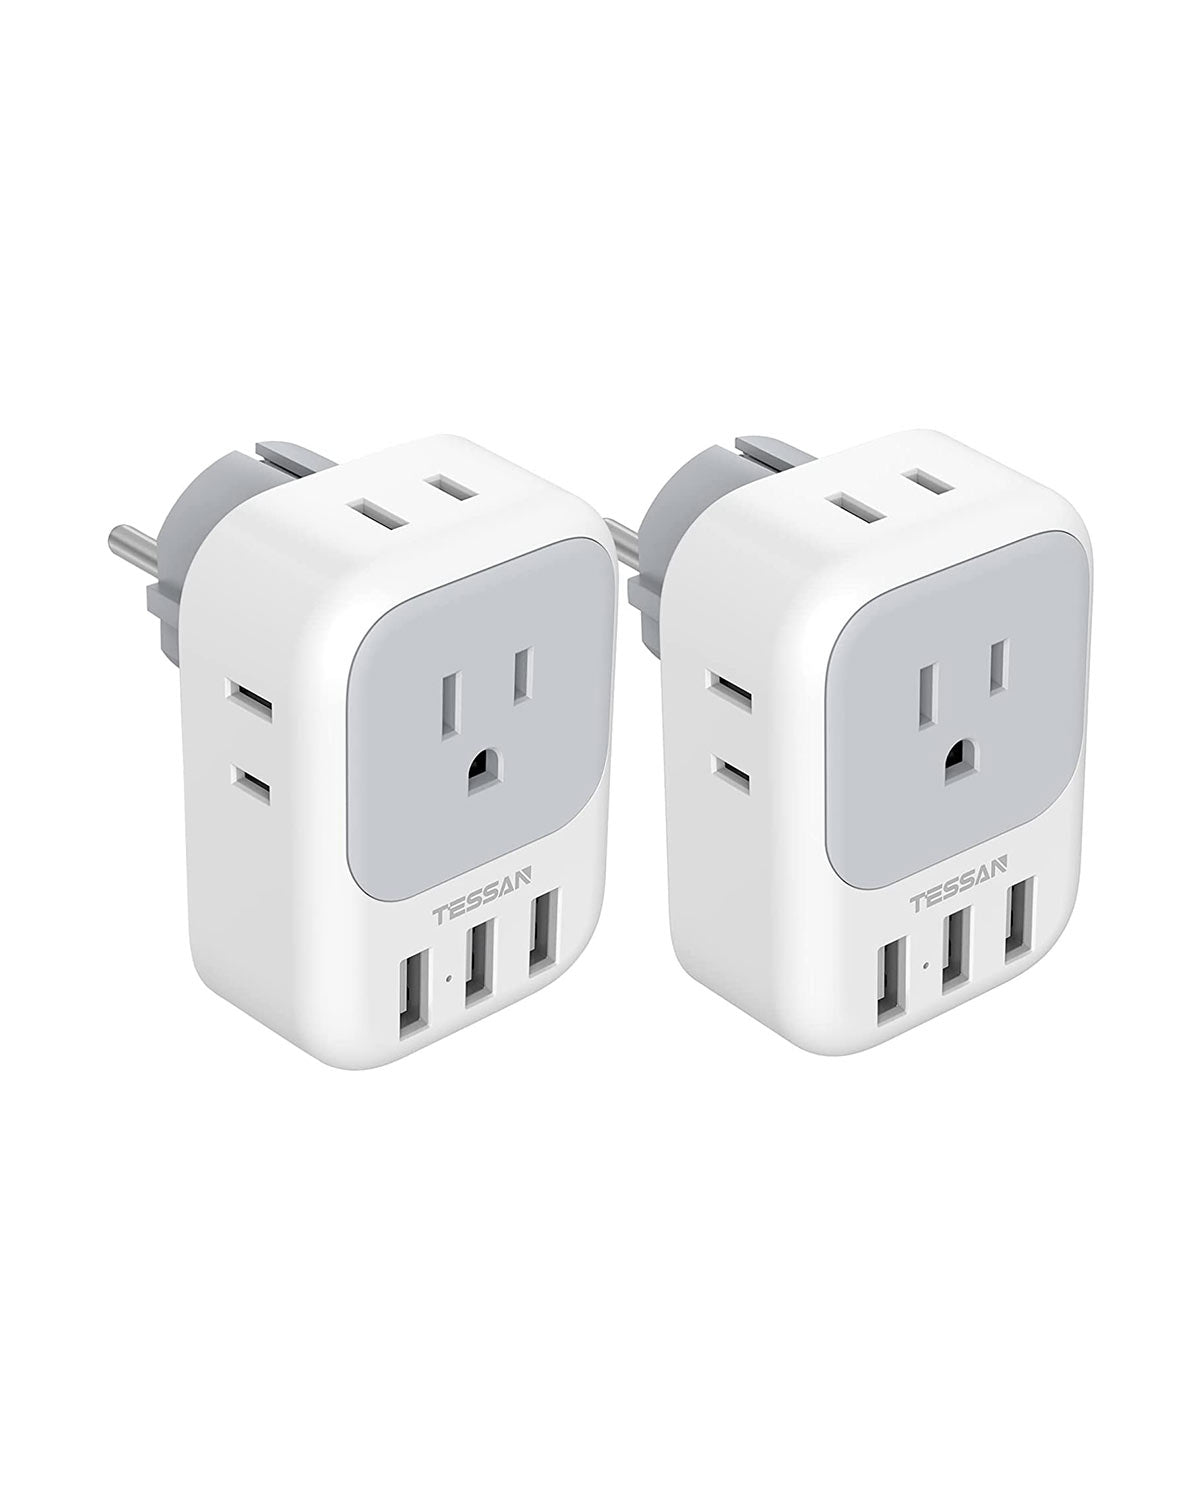 TESSAN Travel Adaptor for US to Europe EU with 4 AC Outlets 3 USB Ports, 2 Pack